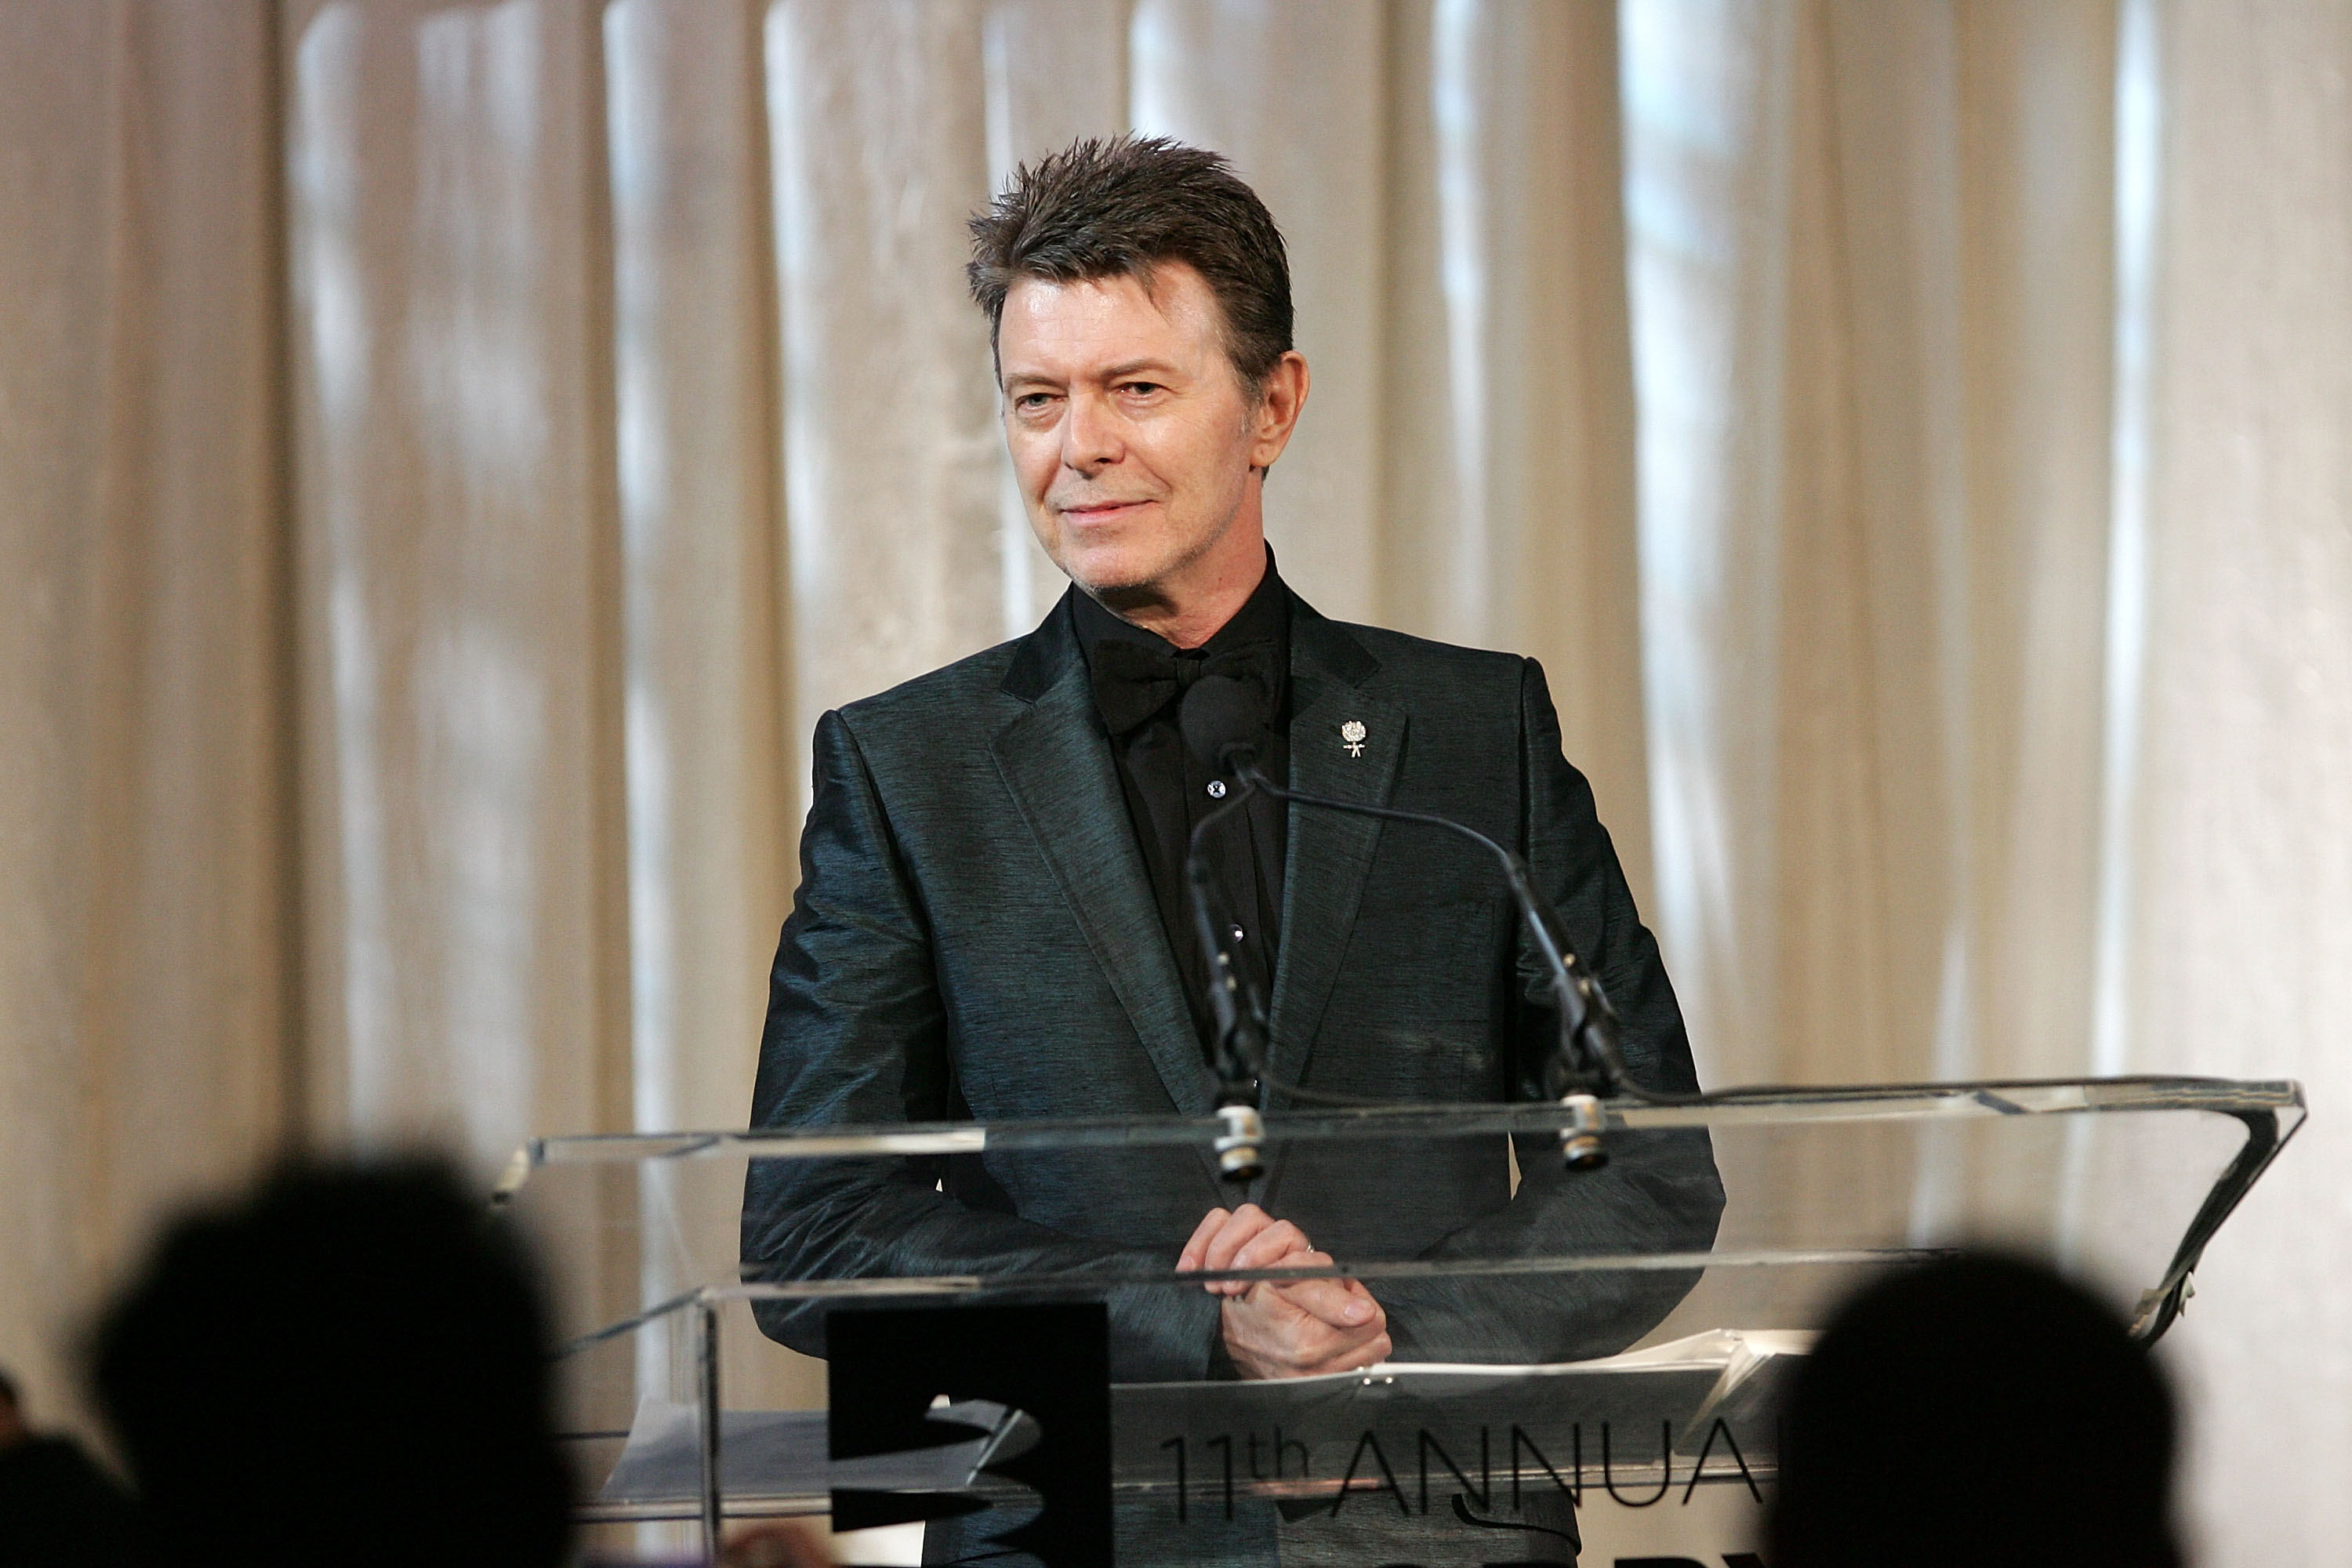 David Bowie at the 11th Annual Webby Awards on June 5, 2007 | Source: Getty Images